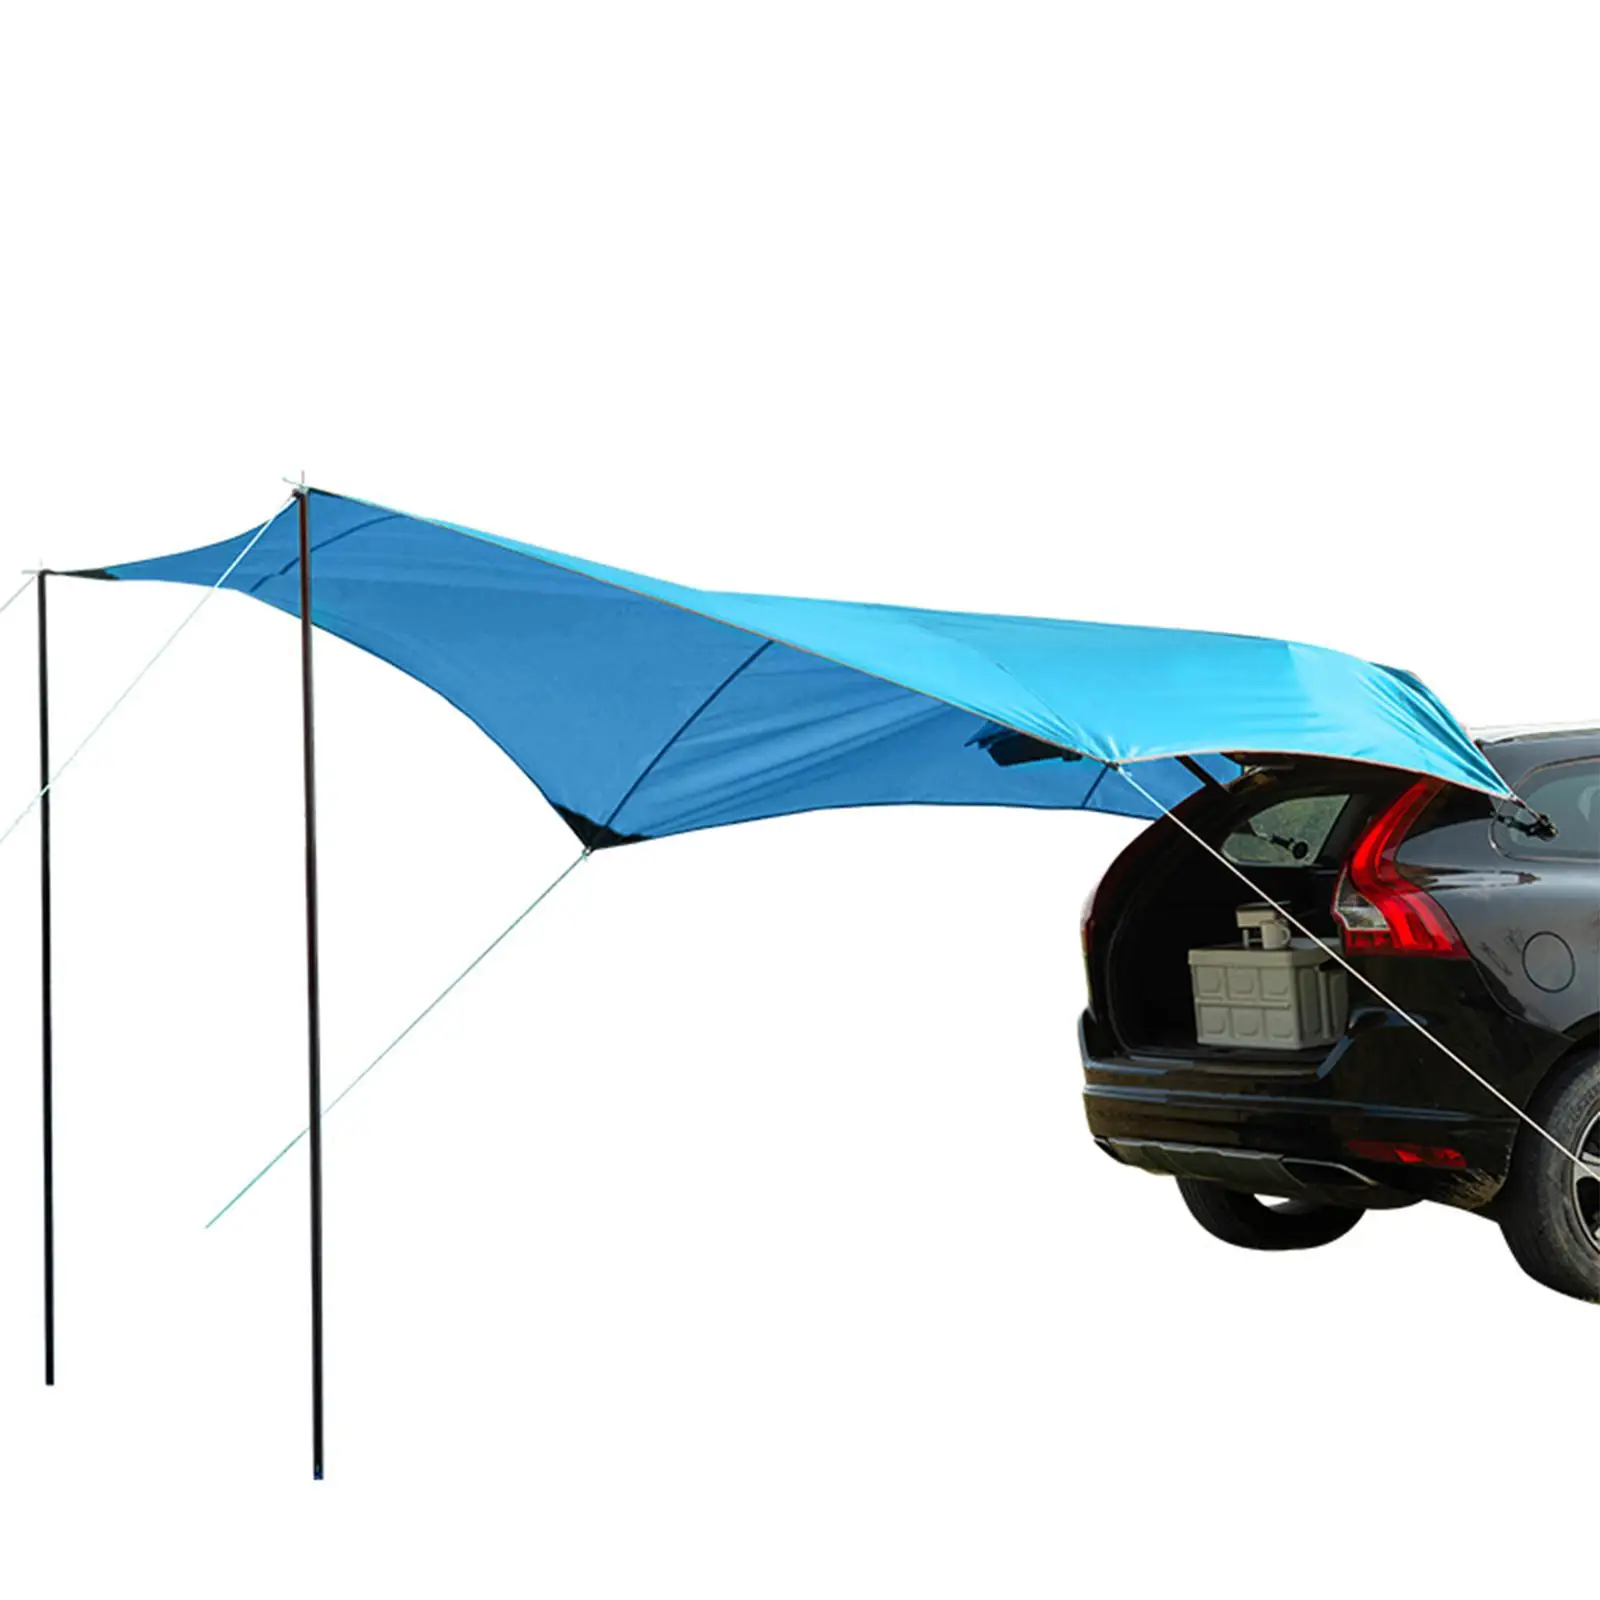 Outdoor Car Tent Rainproof Canopy Tarp Sunshade Shelter Waterproof Tail Extension Awning for Fishing Picnic Beach Hiking Camping